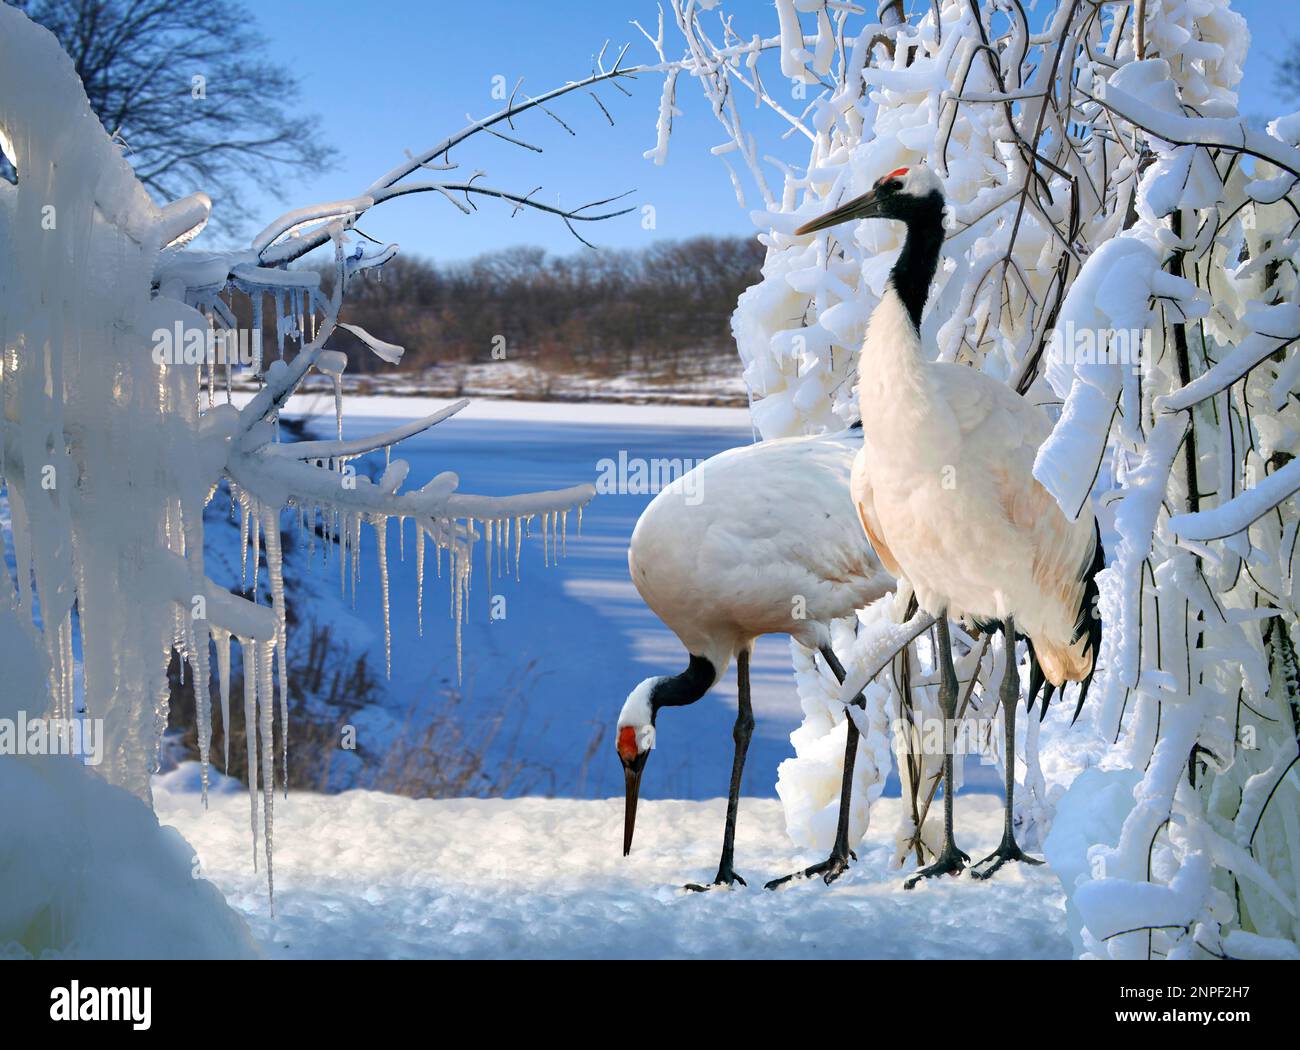 Japanese crane, or Ussuri crane, or Manchurian crane (lat. Grus japonensis) among the frozen snow-covered branches. Stock Photo